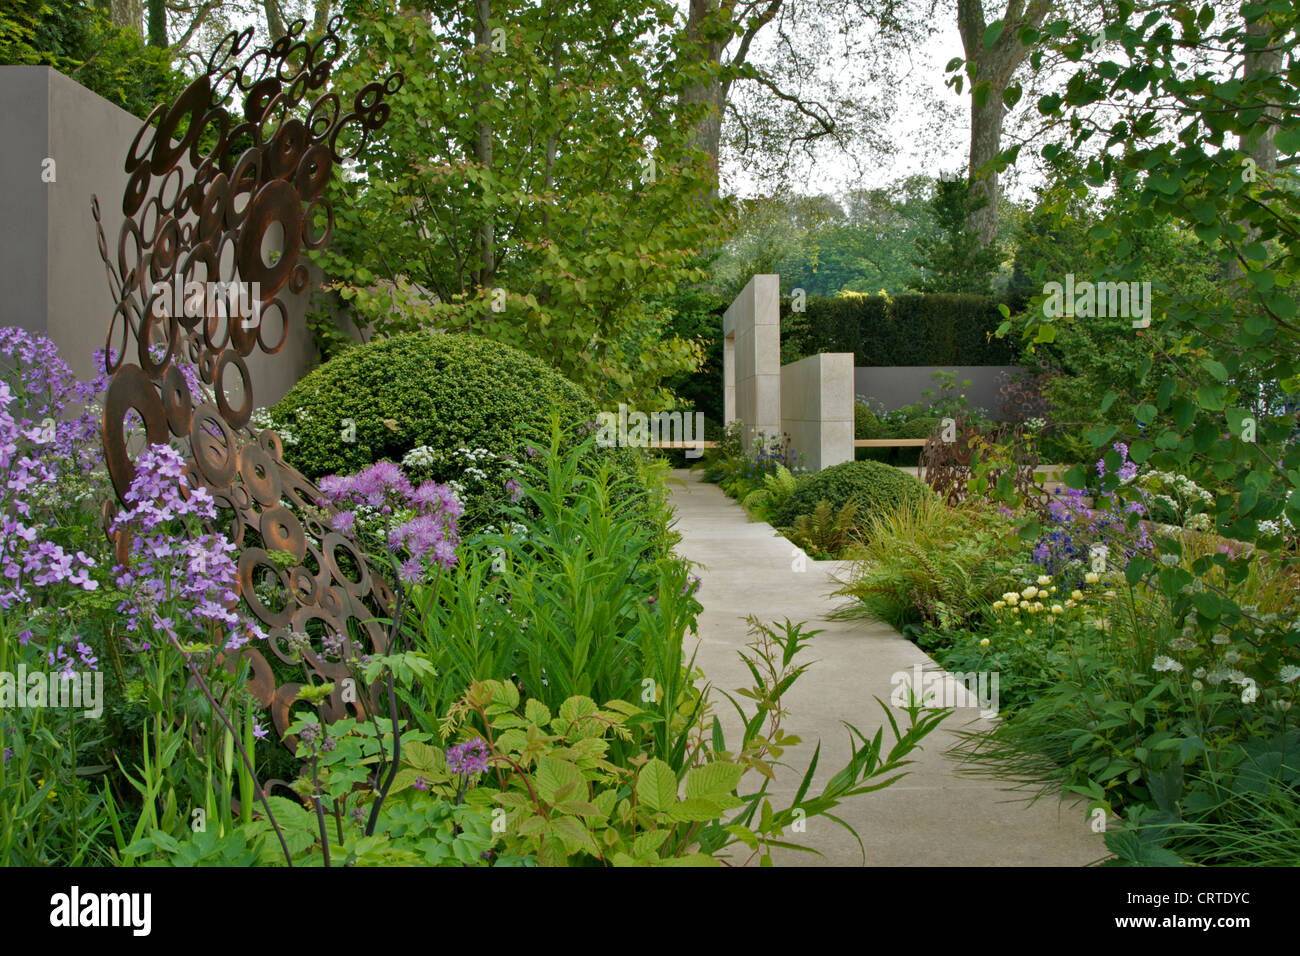 The M&G Garden at RHS Chelsea Flower Show 2012 designed by Andy Sturgeon and awarded a Gold Medal. Stock Photo